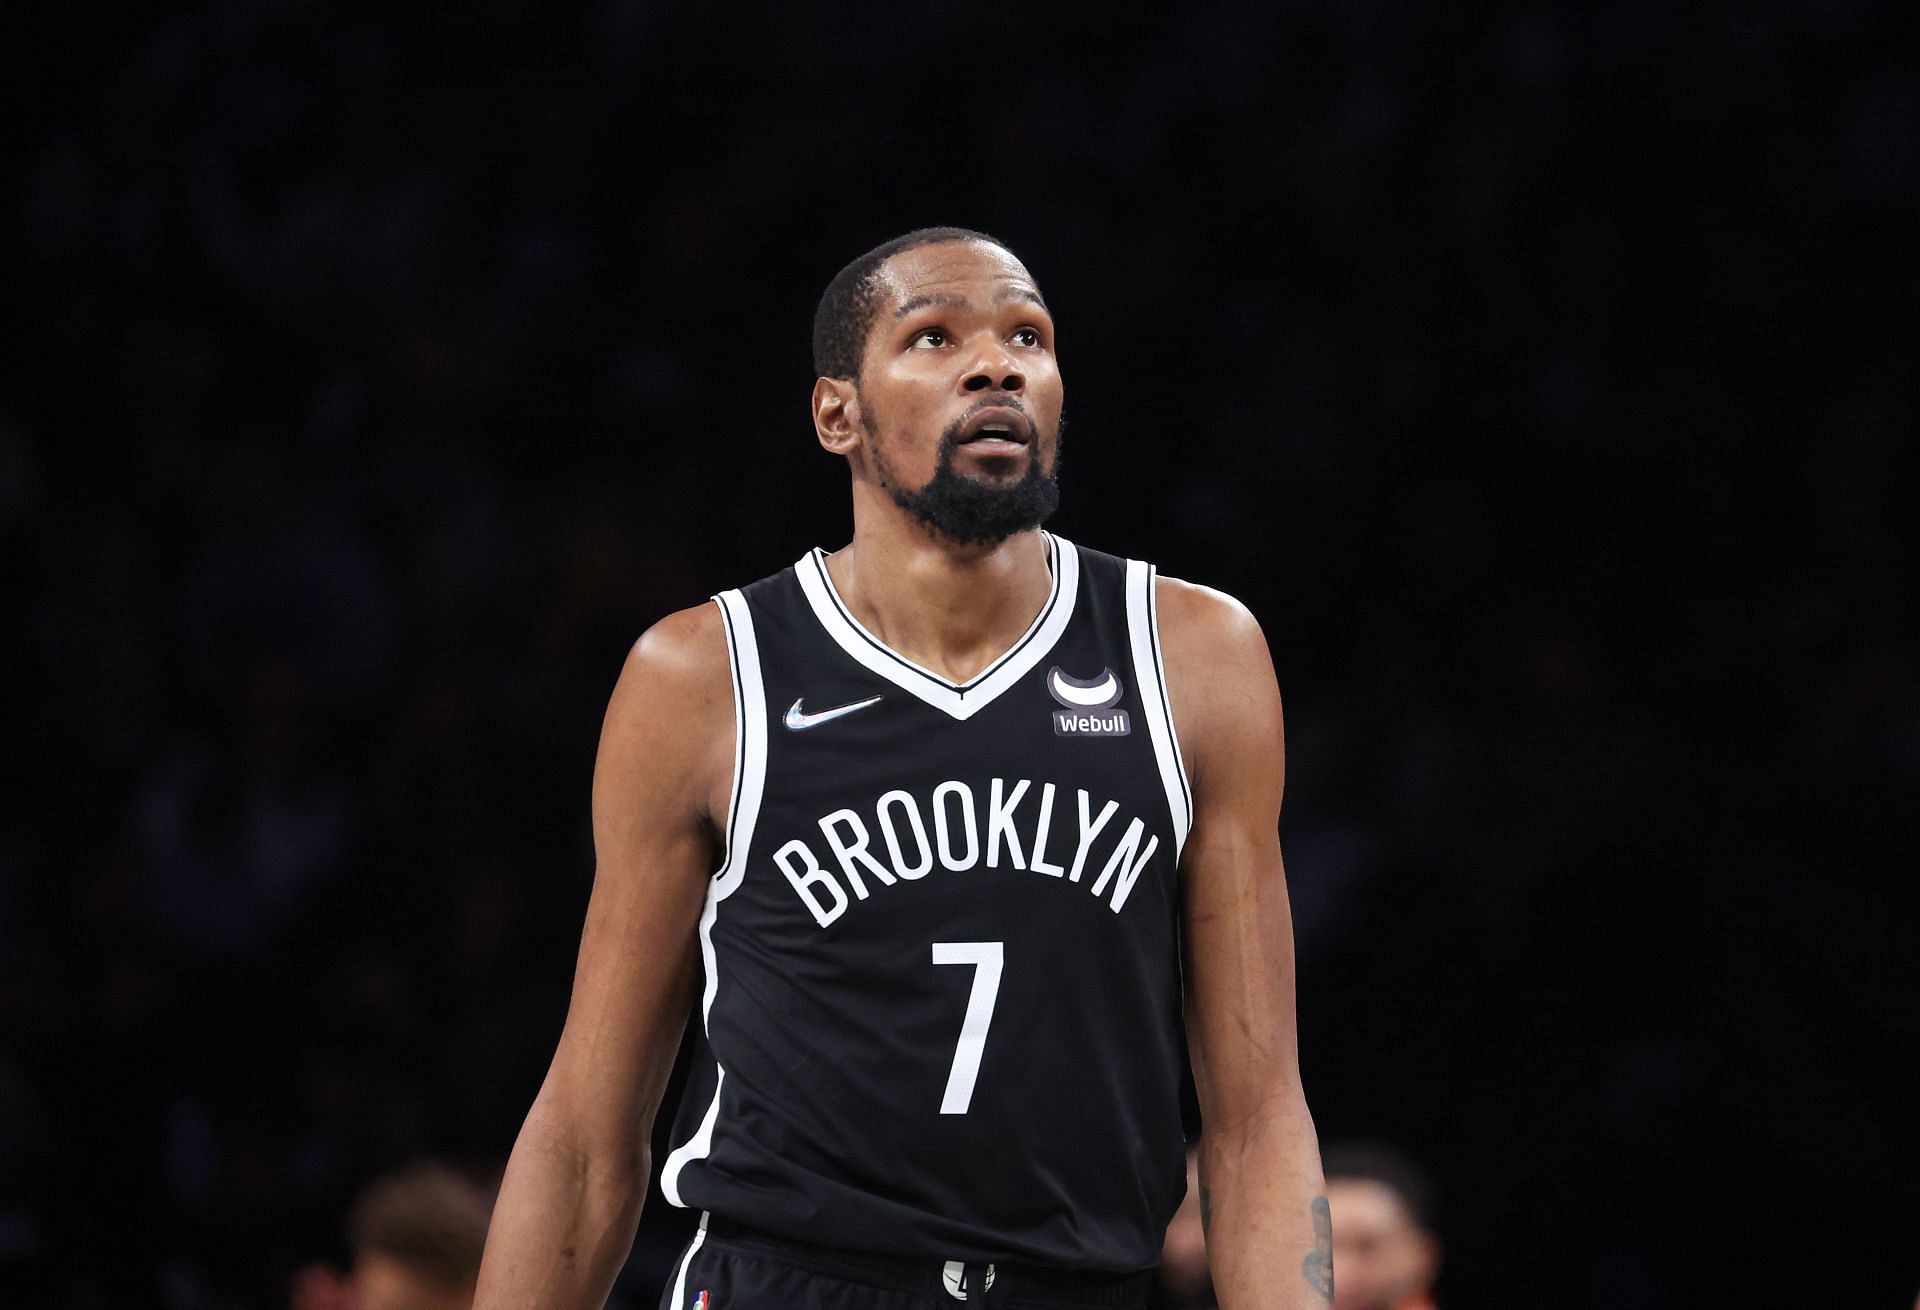 Kevin Durant requested a trade away from the Brooklyn Nets last month